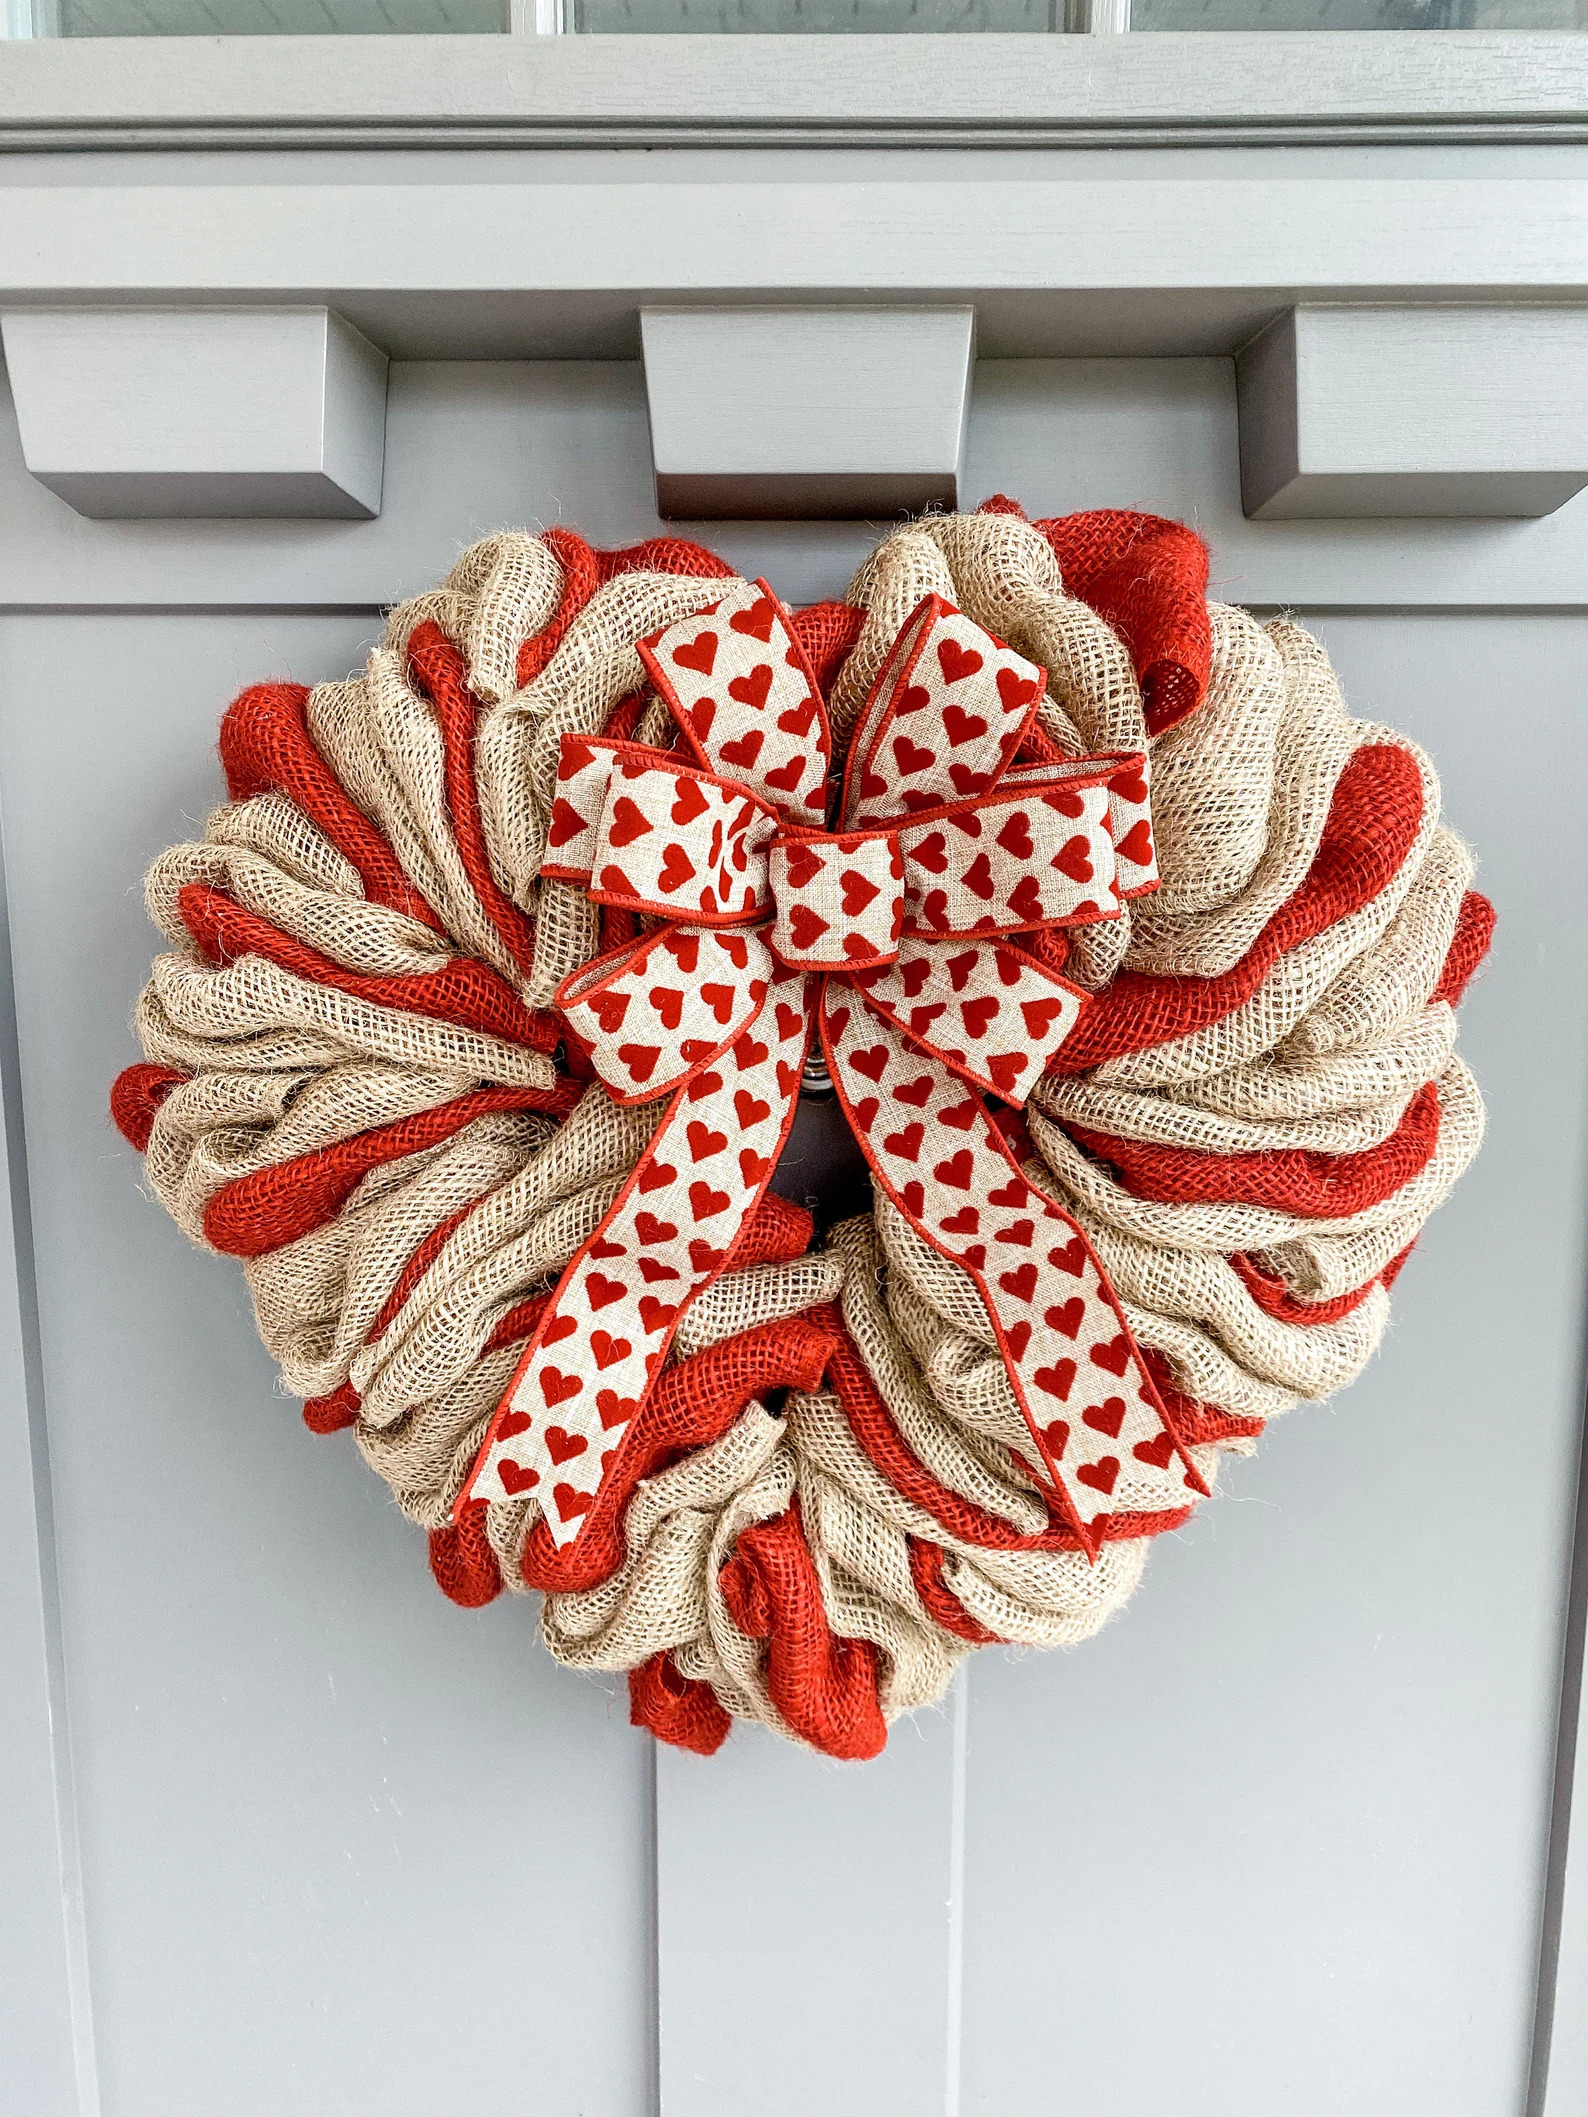 16 Adorable Rustic Valentine's Day Heart Decorations To Set A Lovely Mood